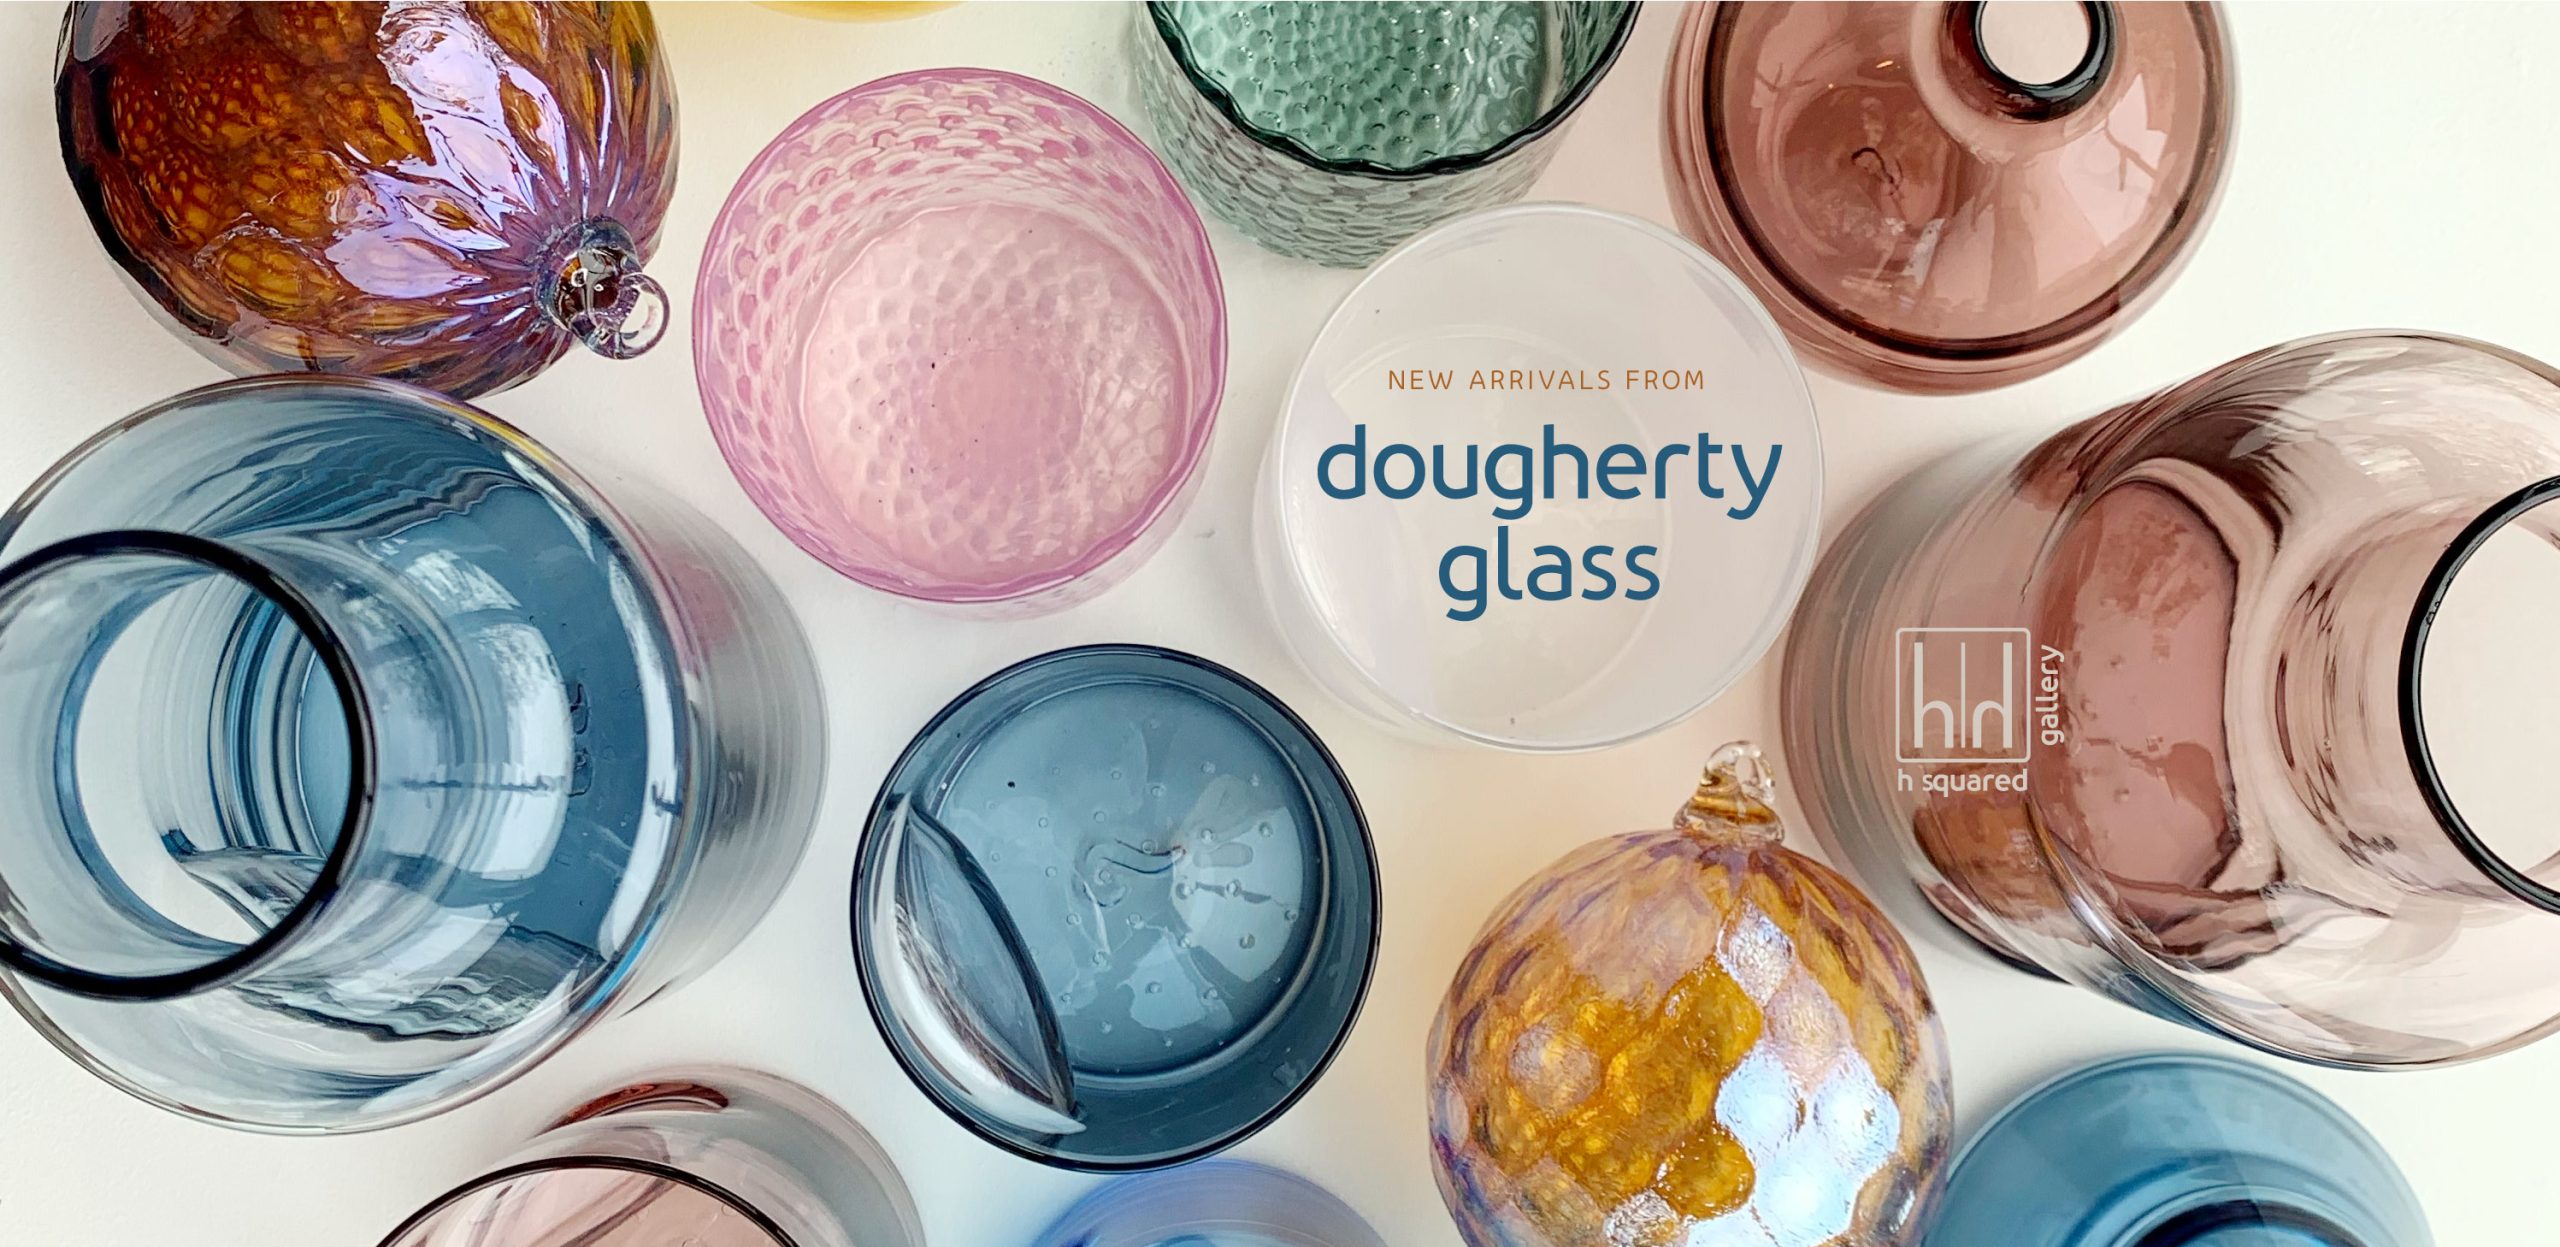 New arrivals from Dougherty Glassworks - tundra and deco drinking glasses, carafes, bud vases, and glass orbs